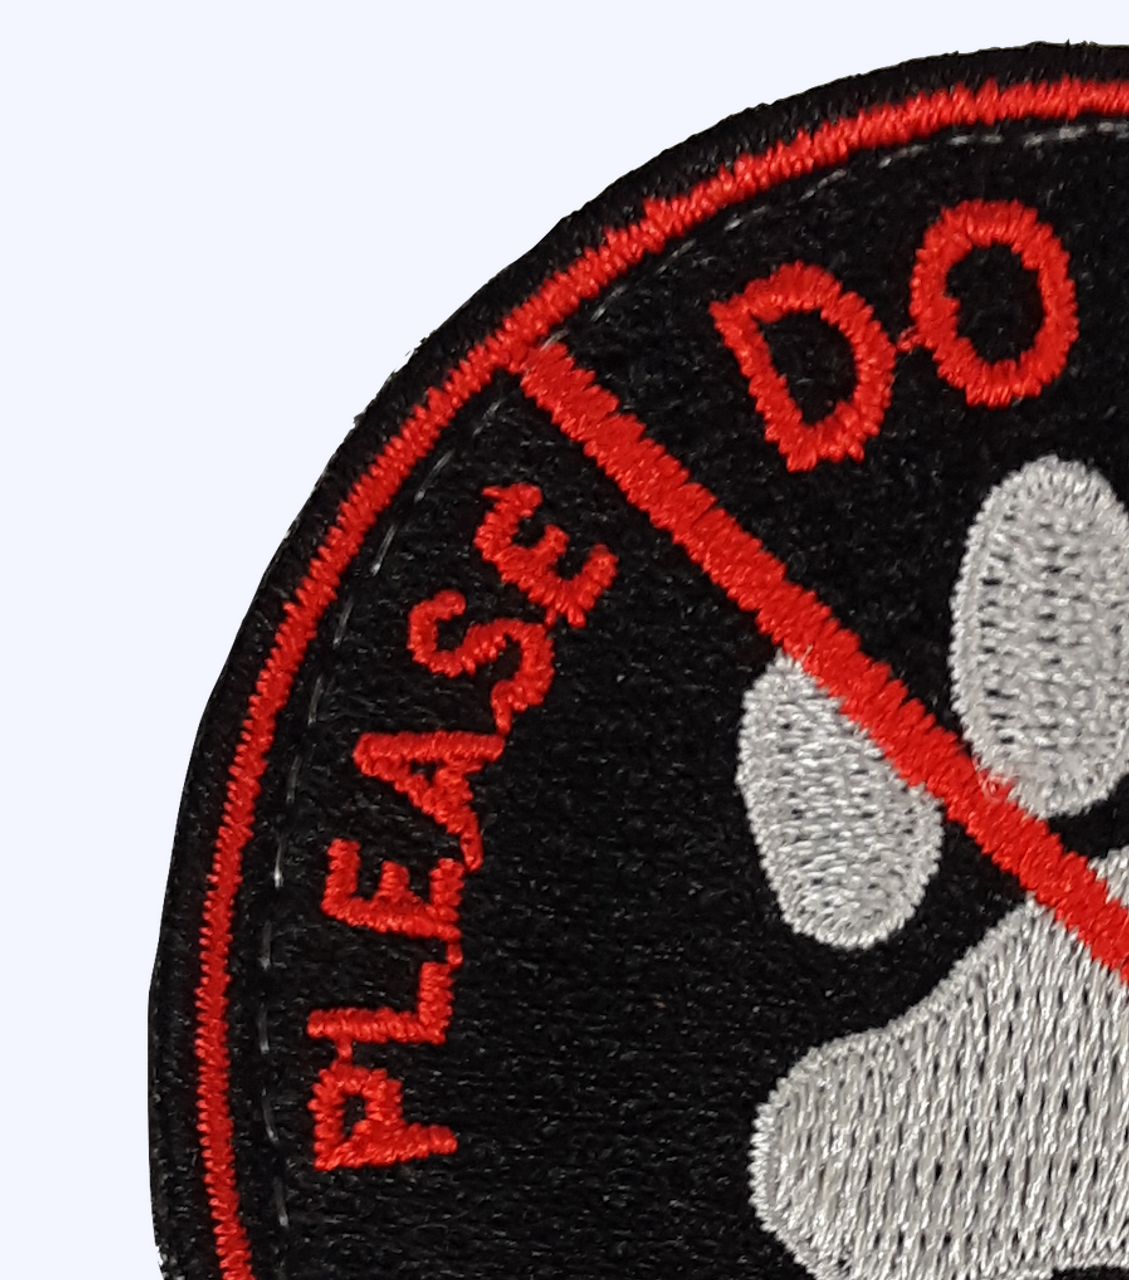 Do Not Pet - Service Dog Patches Personalize Color and Size - Pet